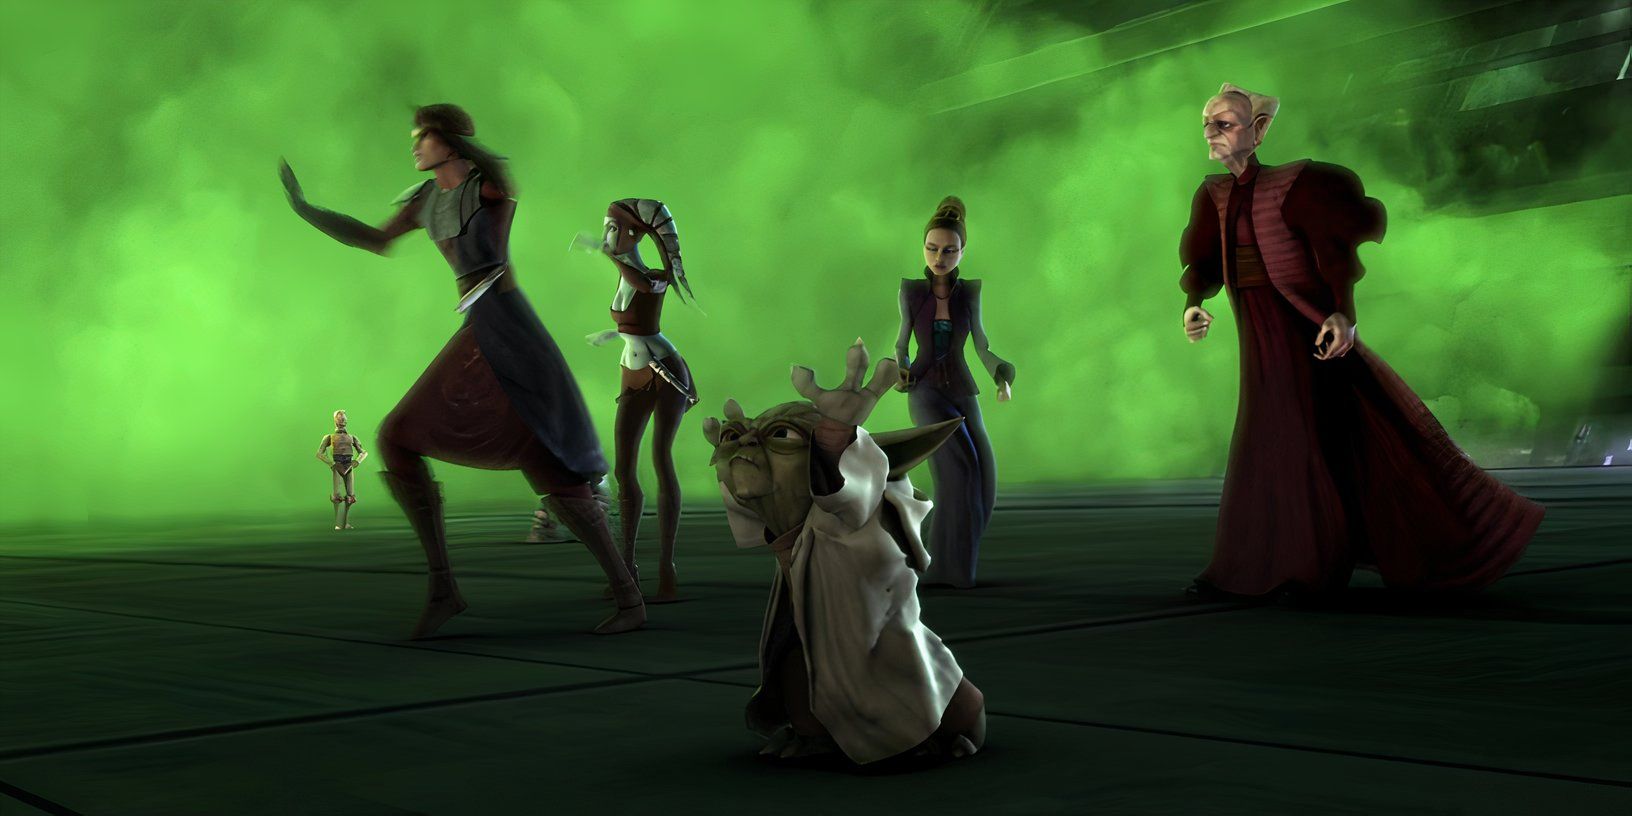 Yoda, Anakin Skywalker, and Aayla Secura use Force barrier to hold back a cloud of poisonous gas and protect Padme Amidala and Chancellor Palpatine during the Zillo Beast arc of Star Wars: The Clone Wars